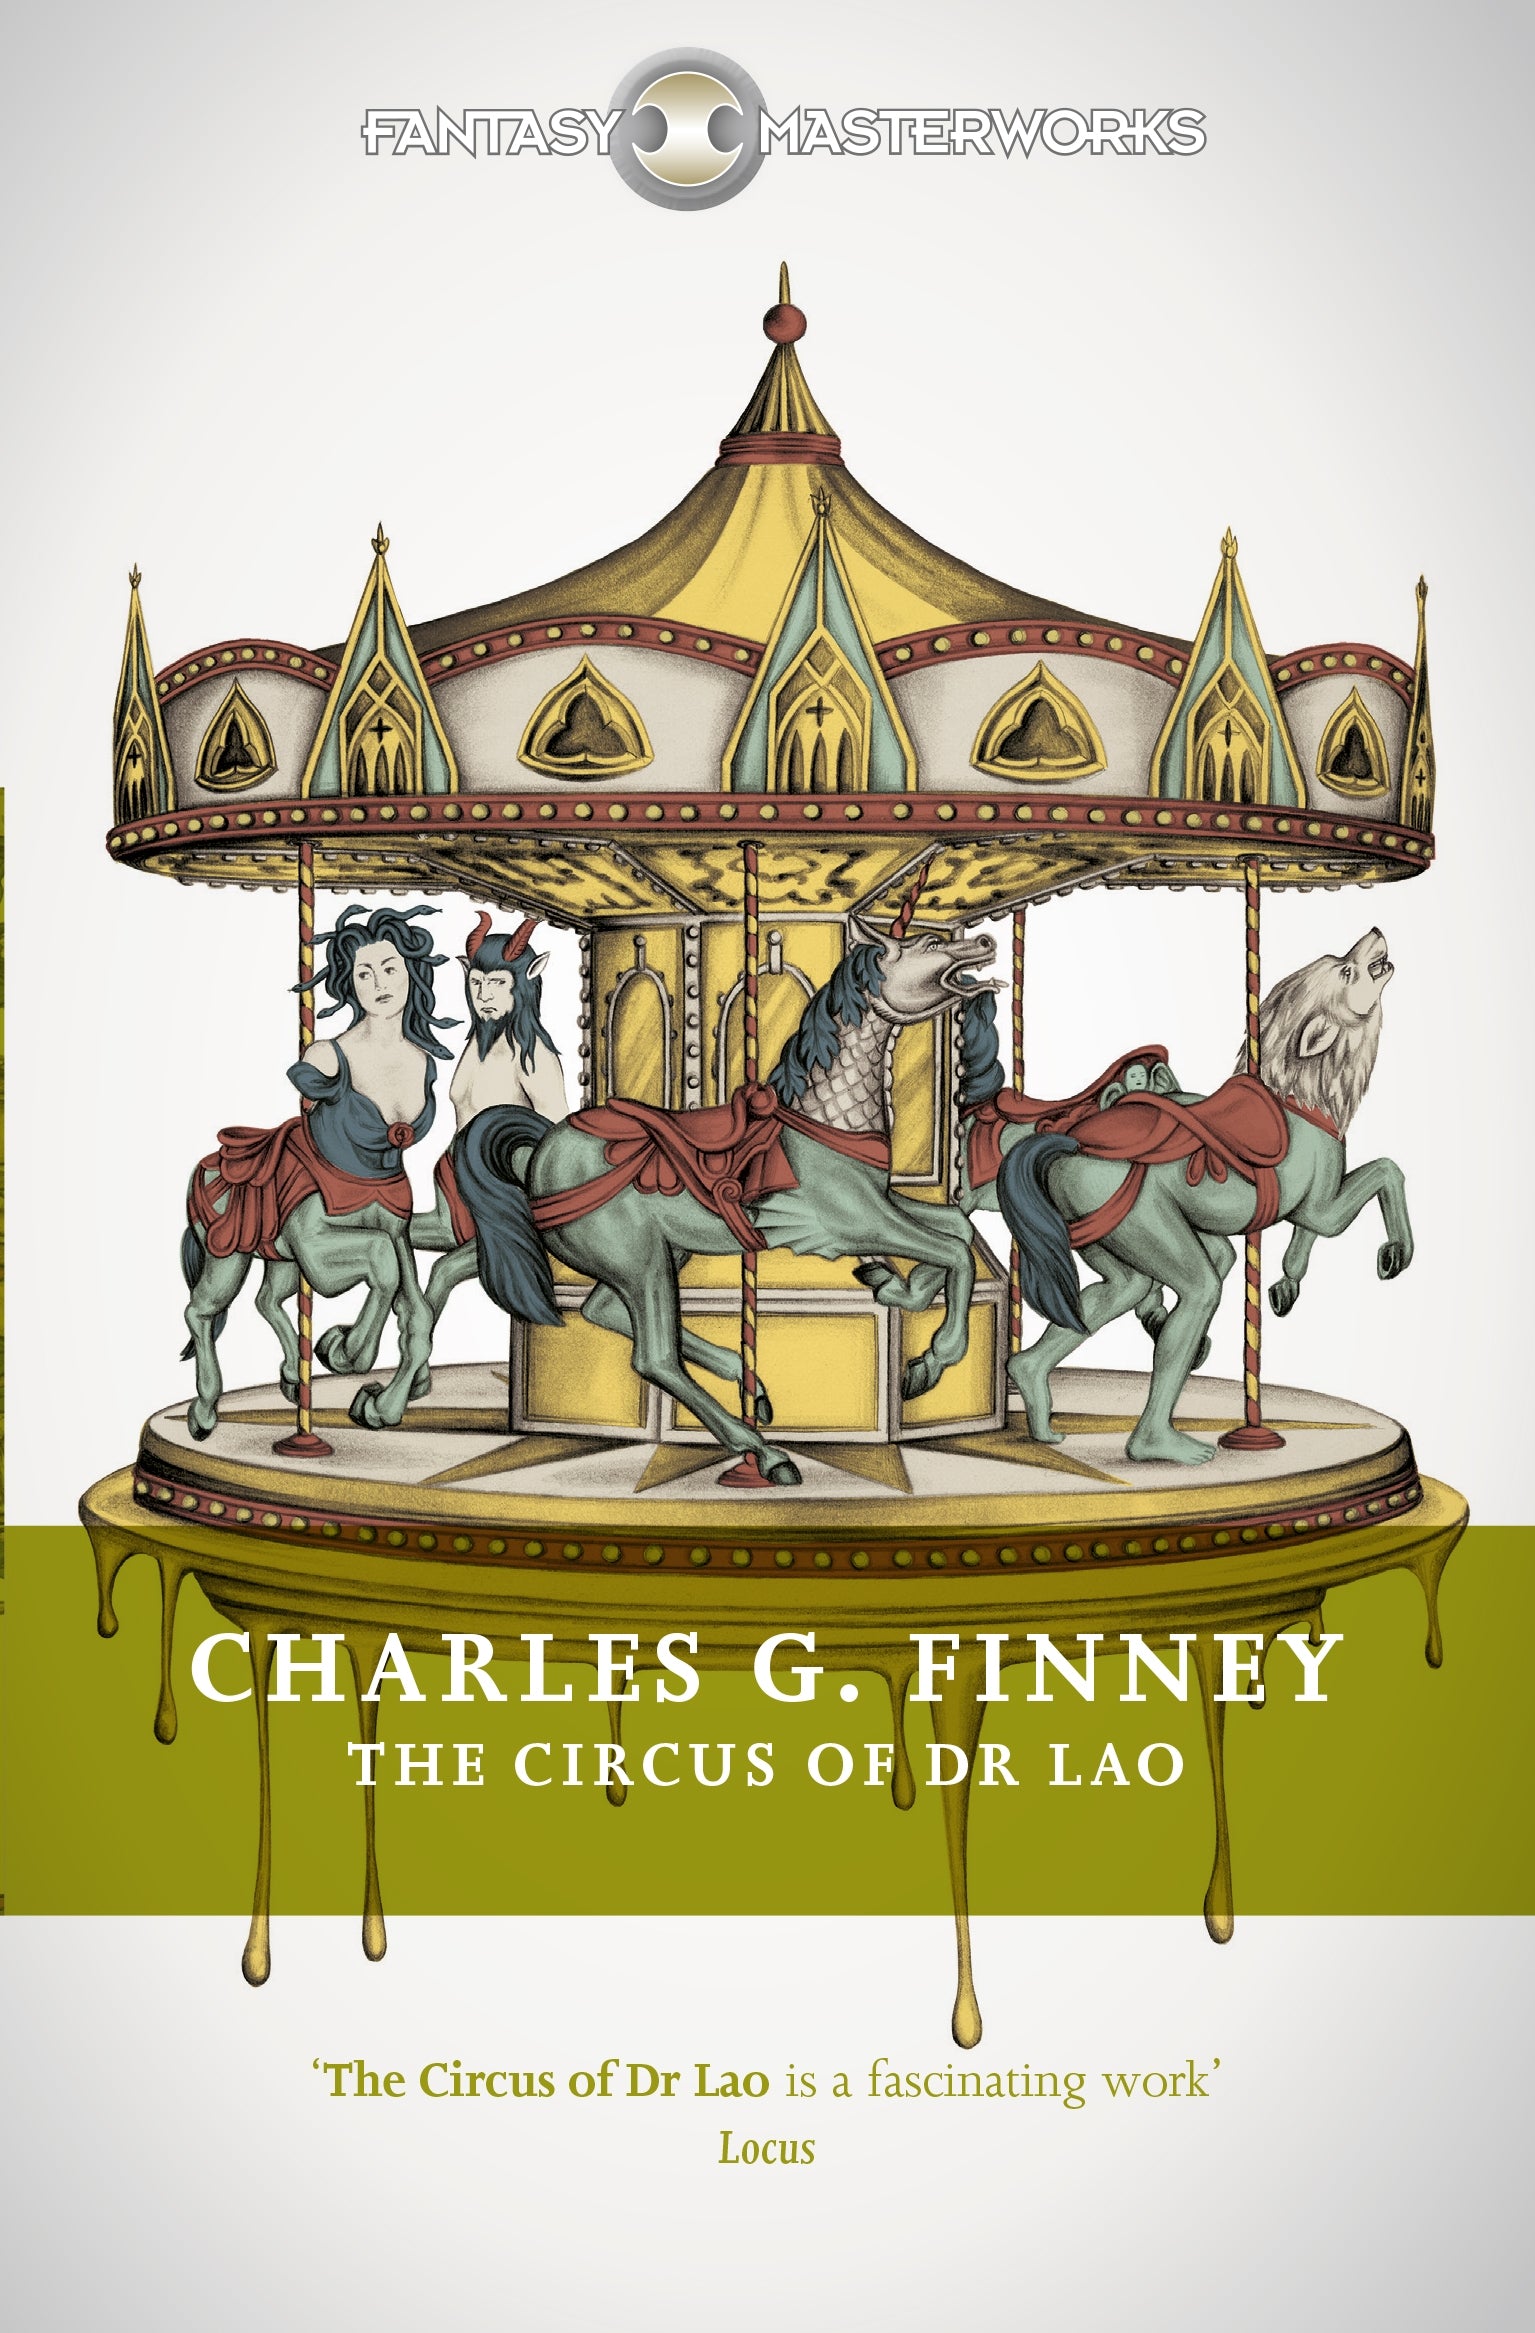 The Circus of Dr Lao by Charles G. Finney